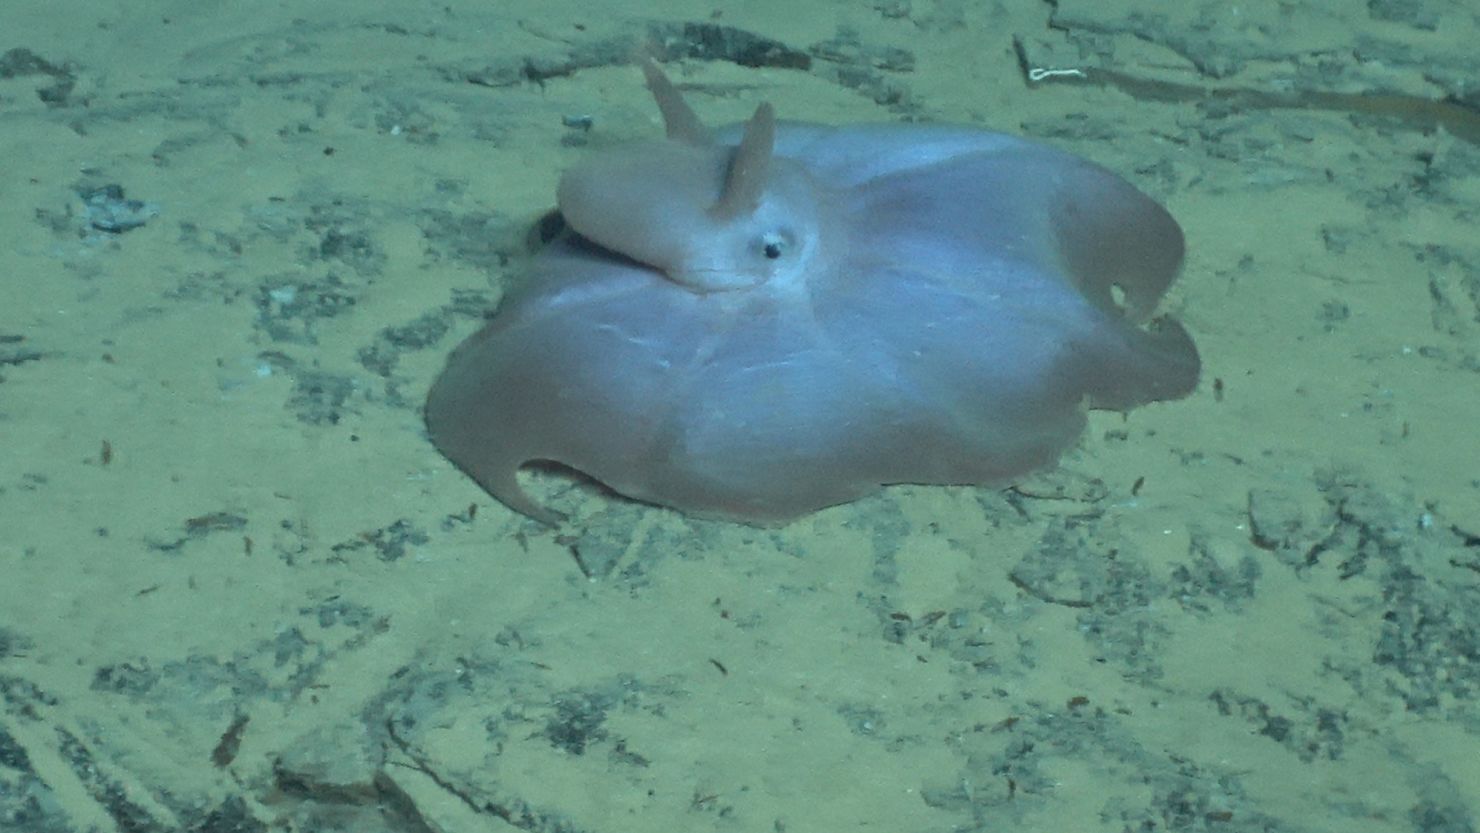 A Dumbo octopus can be seen along the ocean floor during a deep-sea dive in the Alvin submersible.